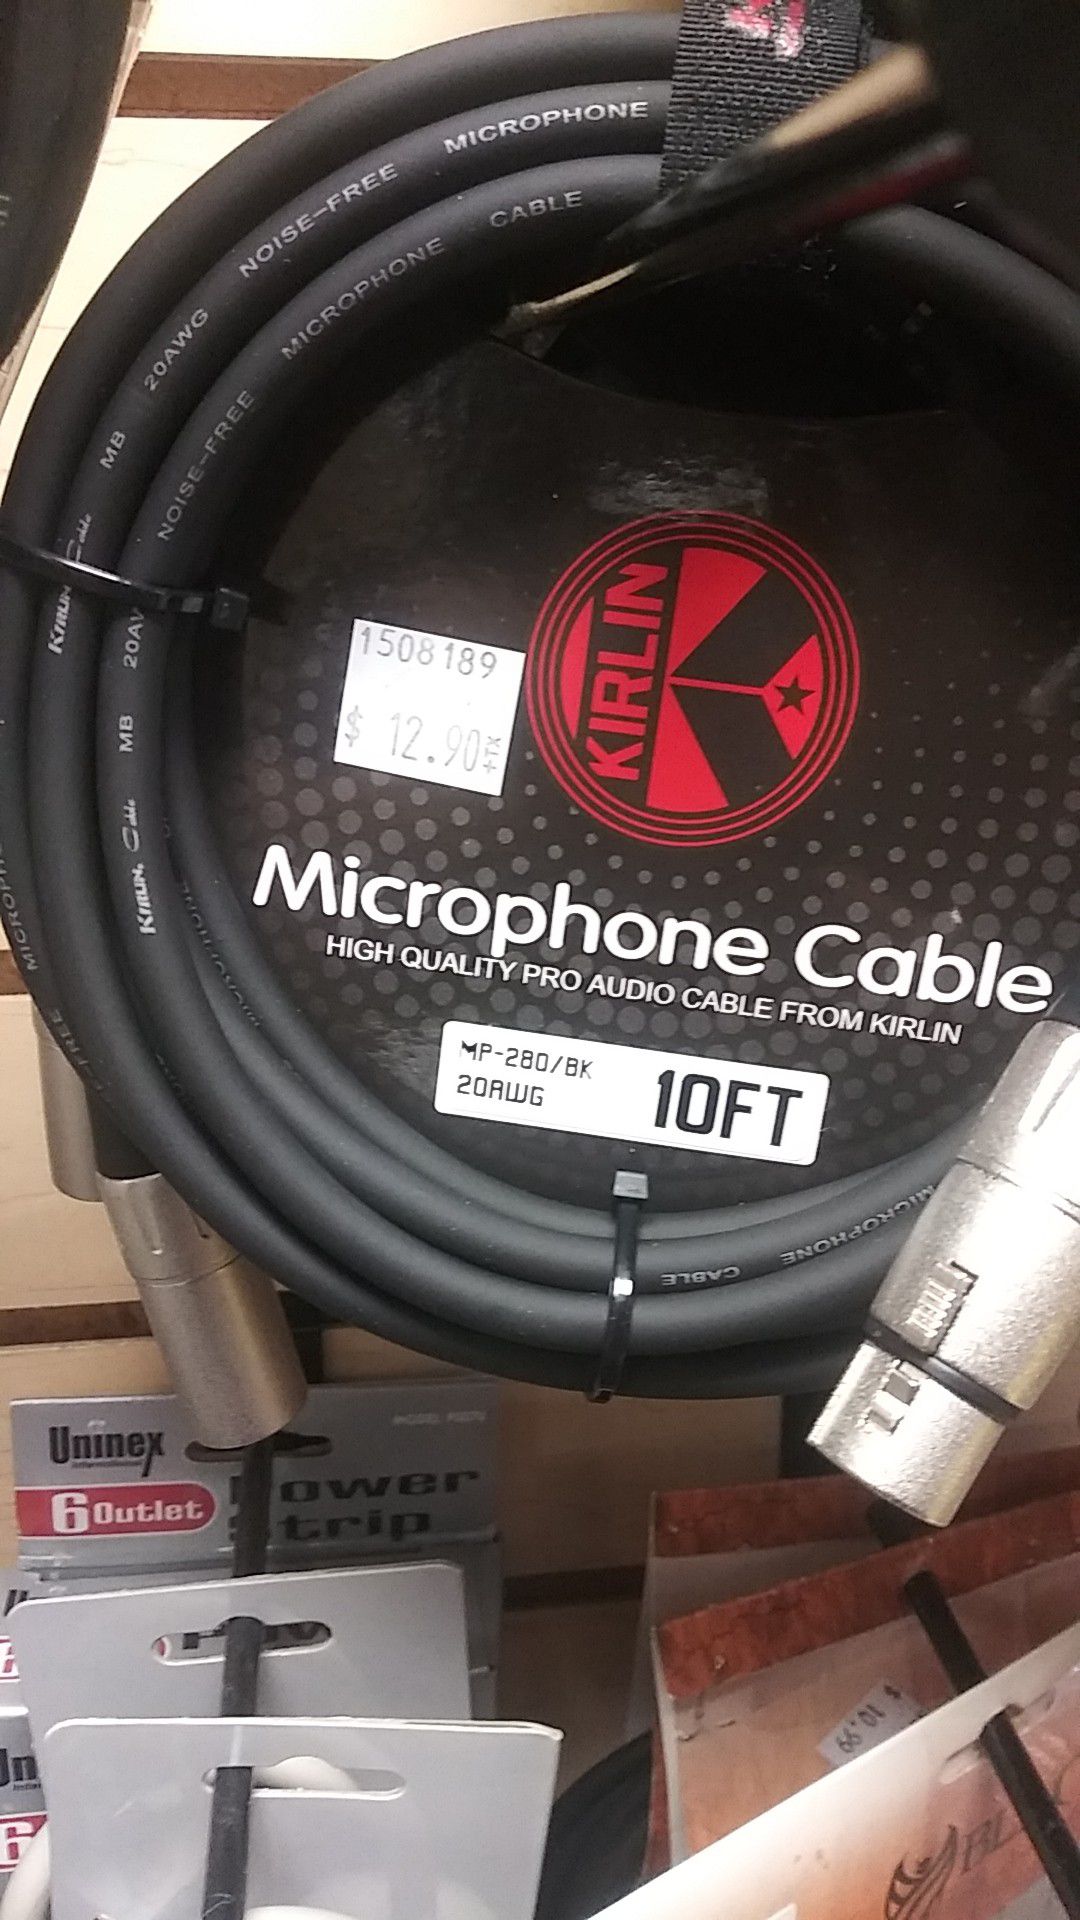 Kirlin 10ft Microphone Cable